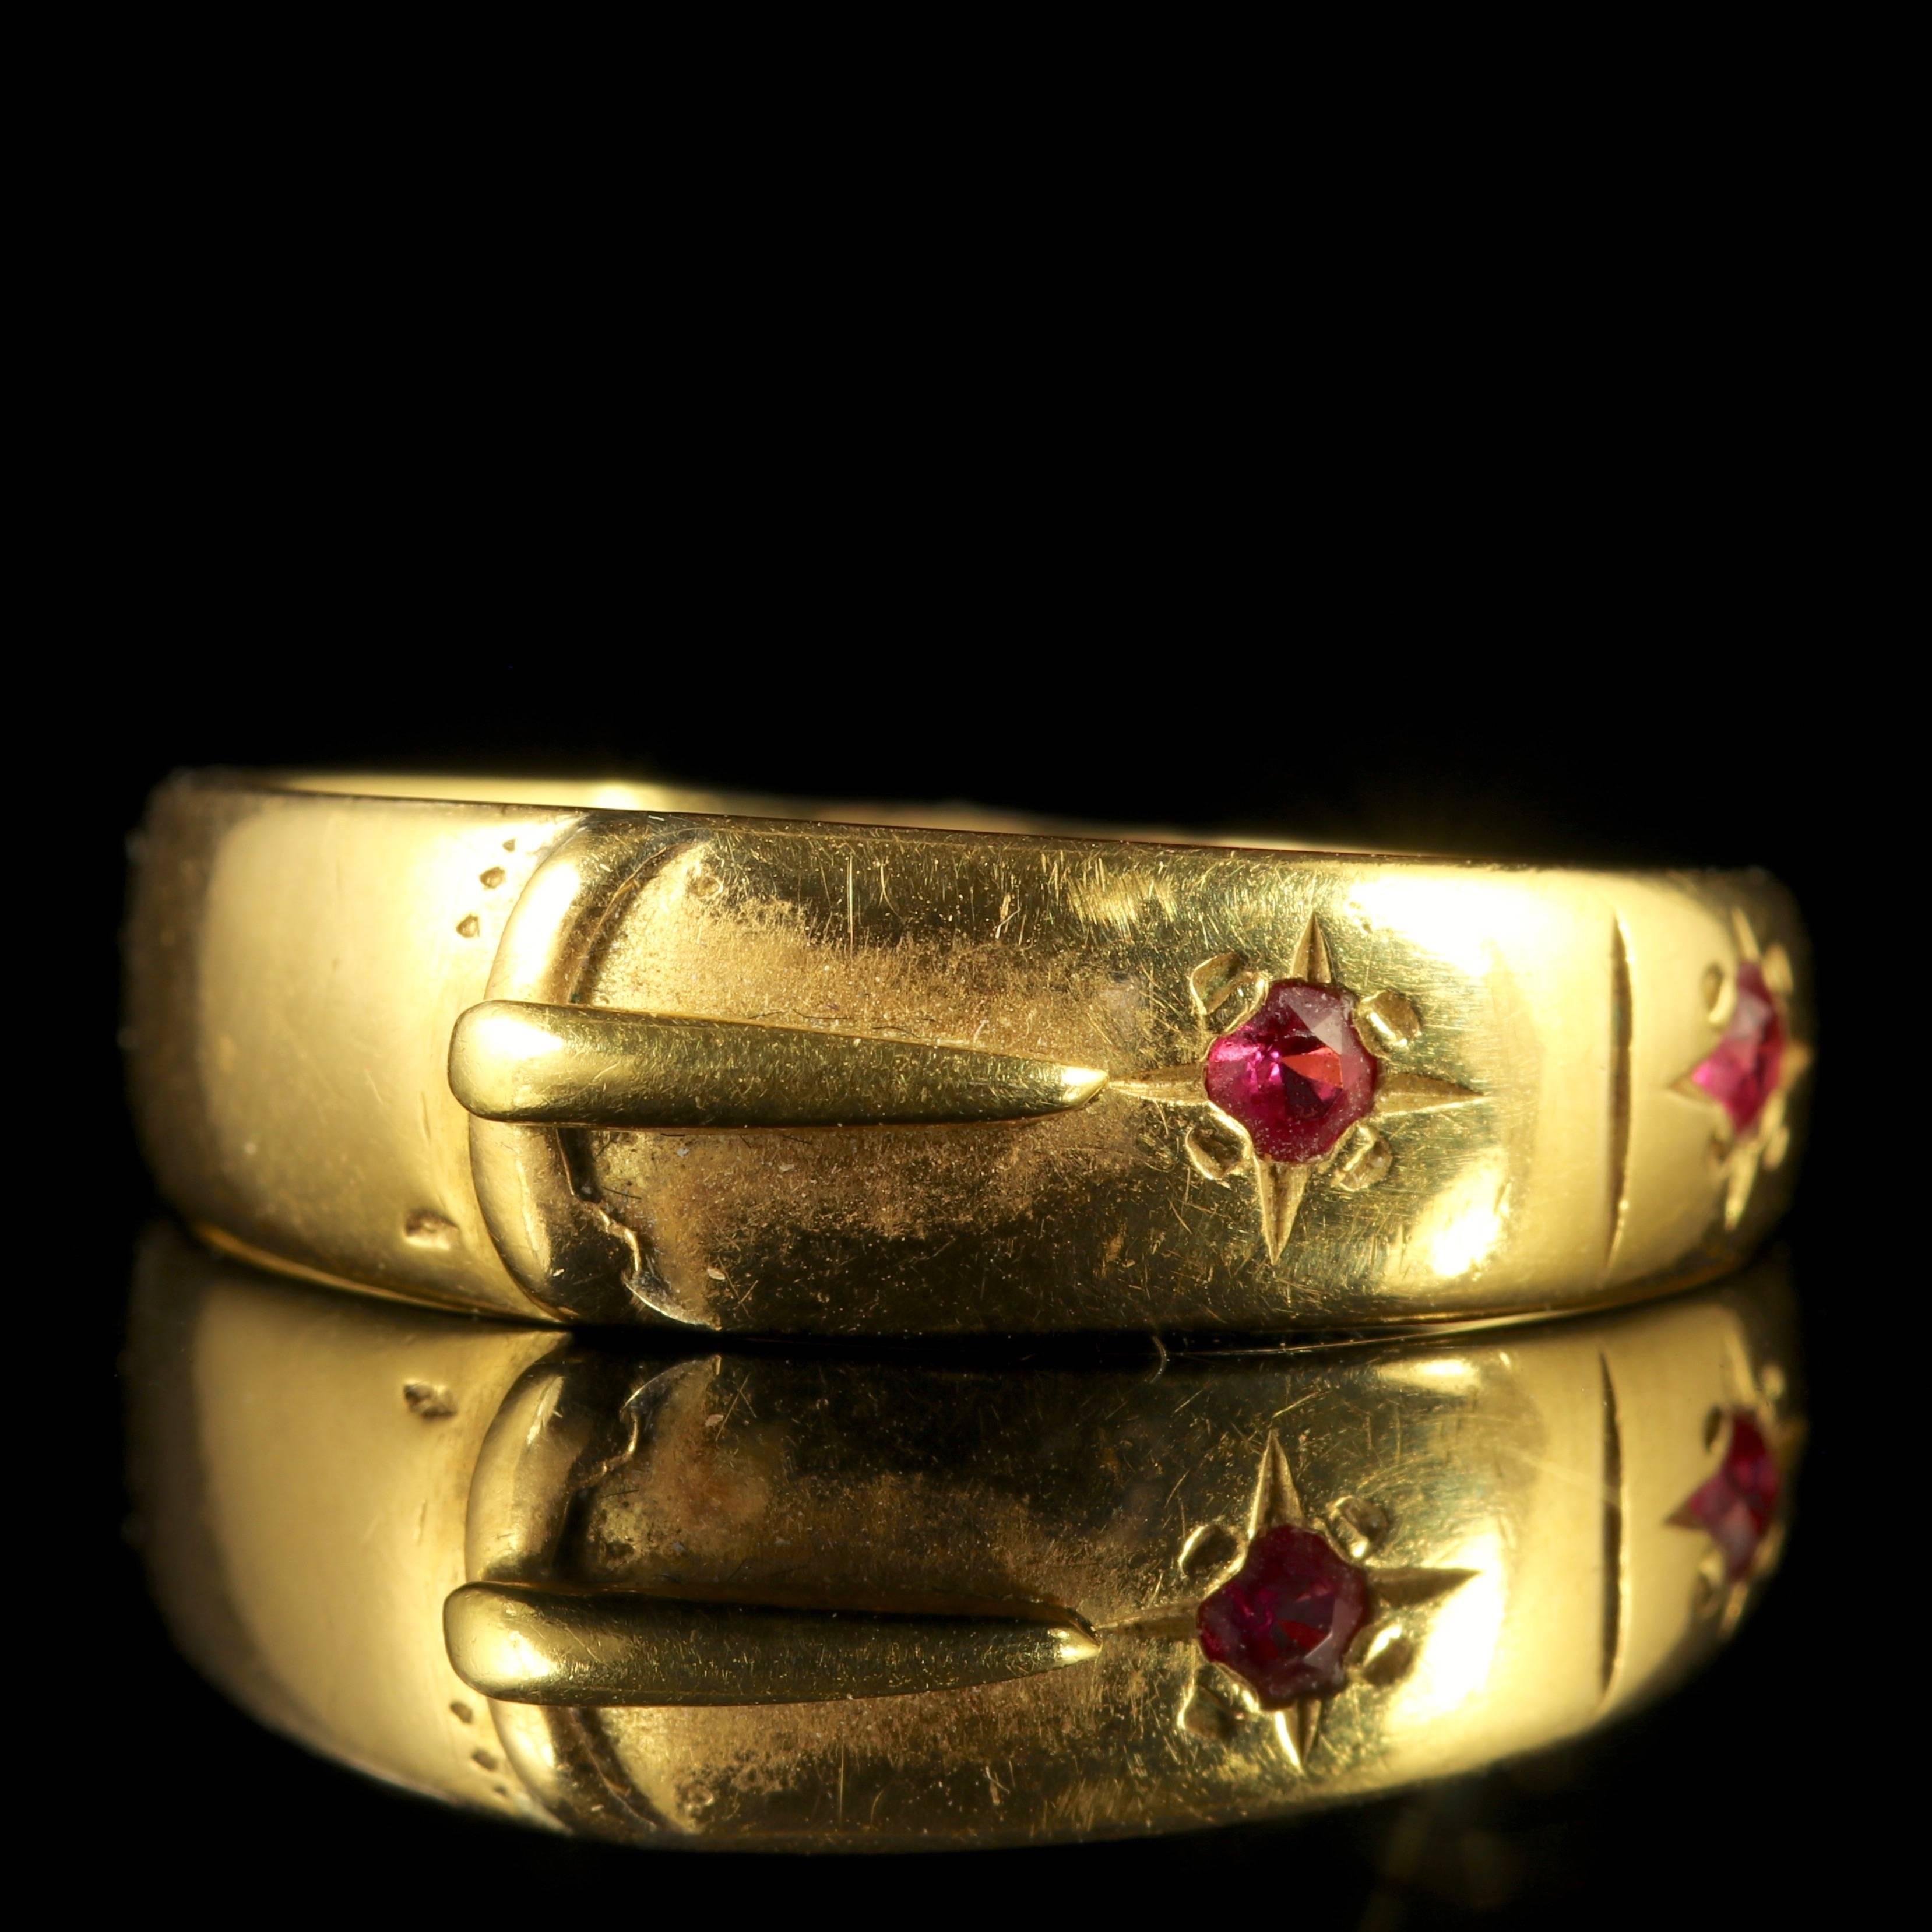 To read more please click continue reading below-

This is a Stunning 18ct Yellow Gold Buckle Ring set with rich pink Rubies.

The ring boasts two gorgeous pink Rubies set into the ring, with pristine workmanship displayed throughout. 

The colour